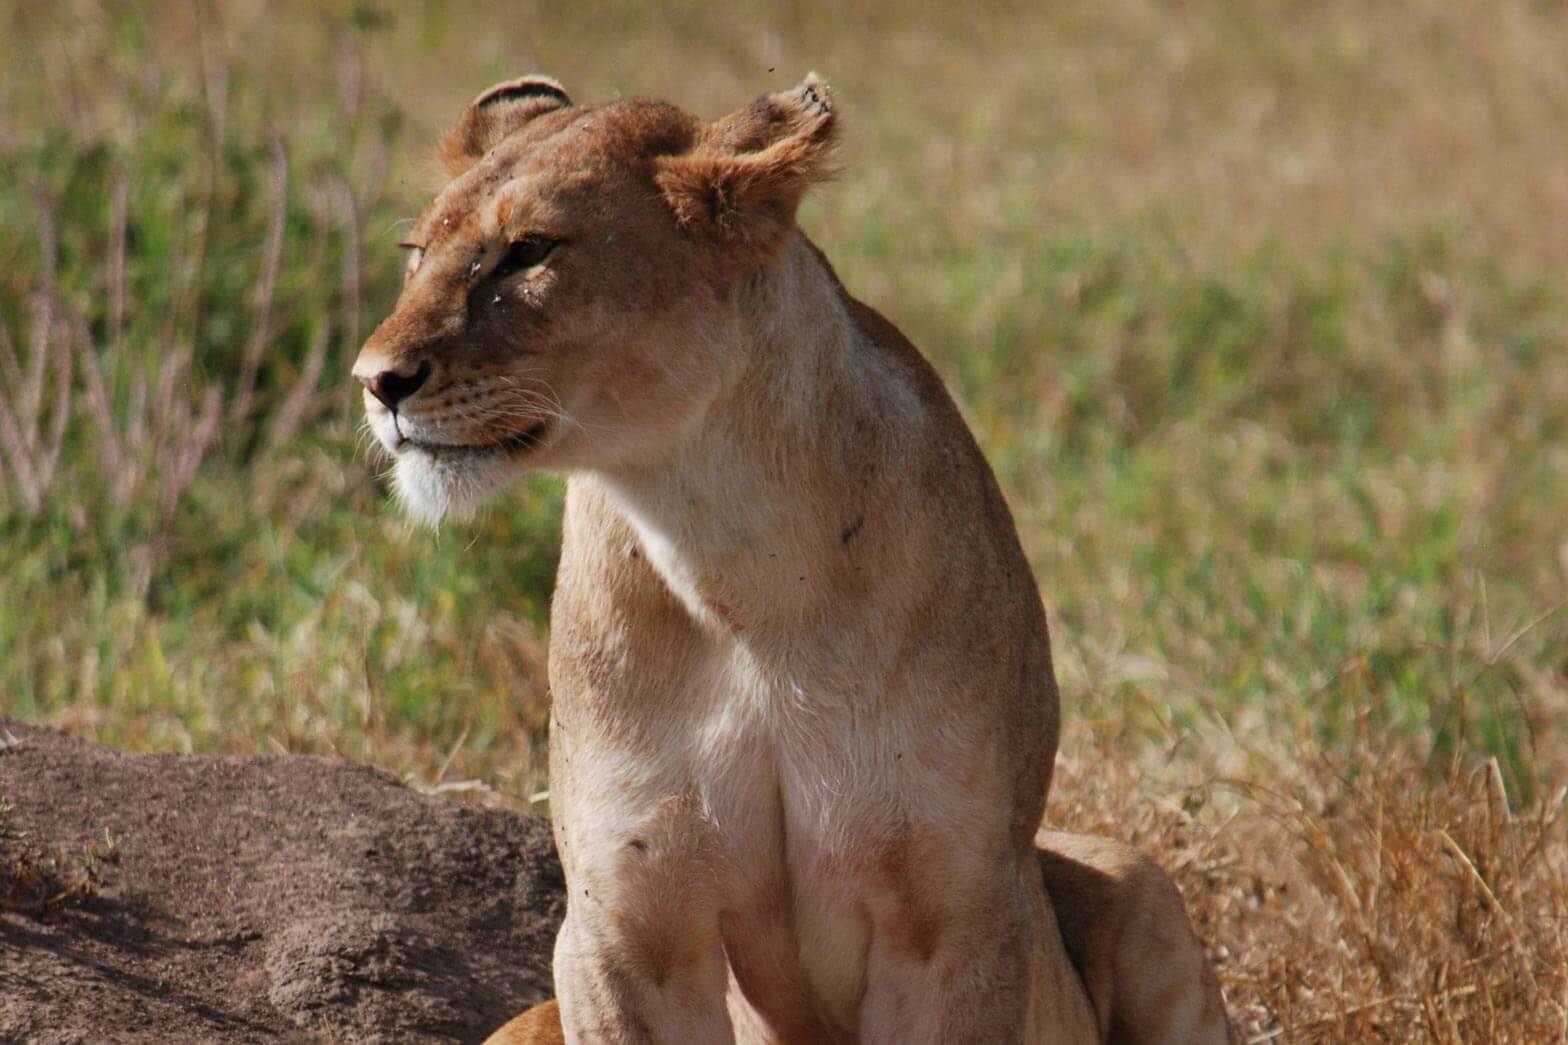 A young lioness